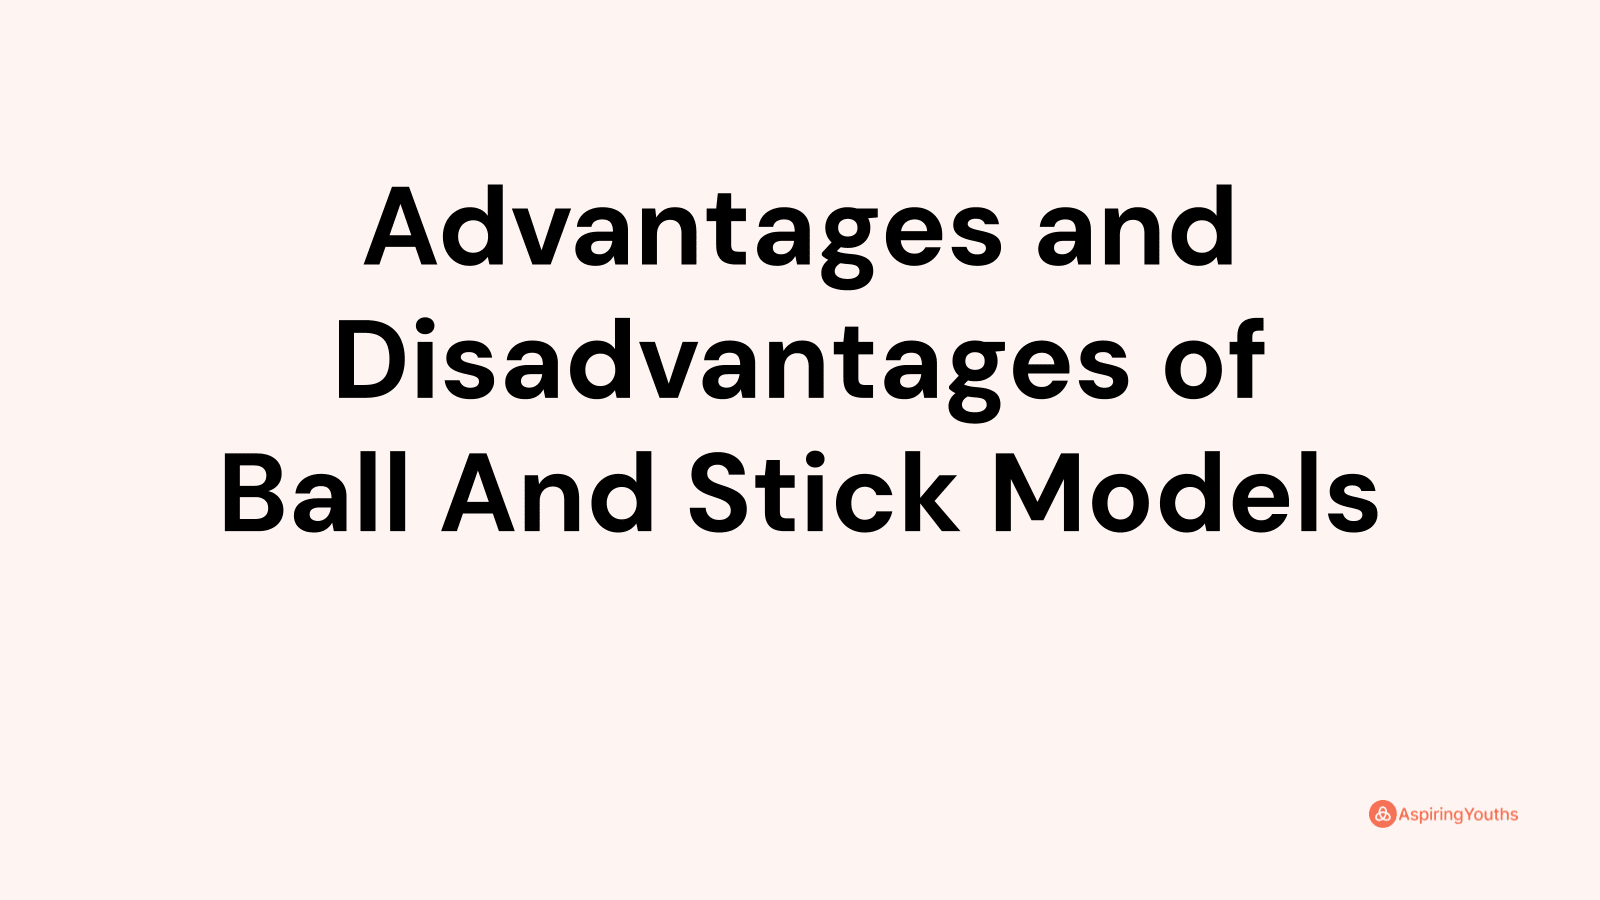 Advantages and disadvantages of Ball And Stick Models